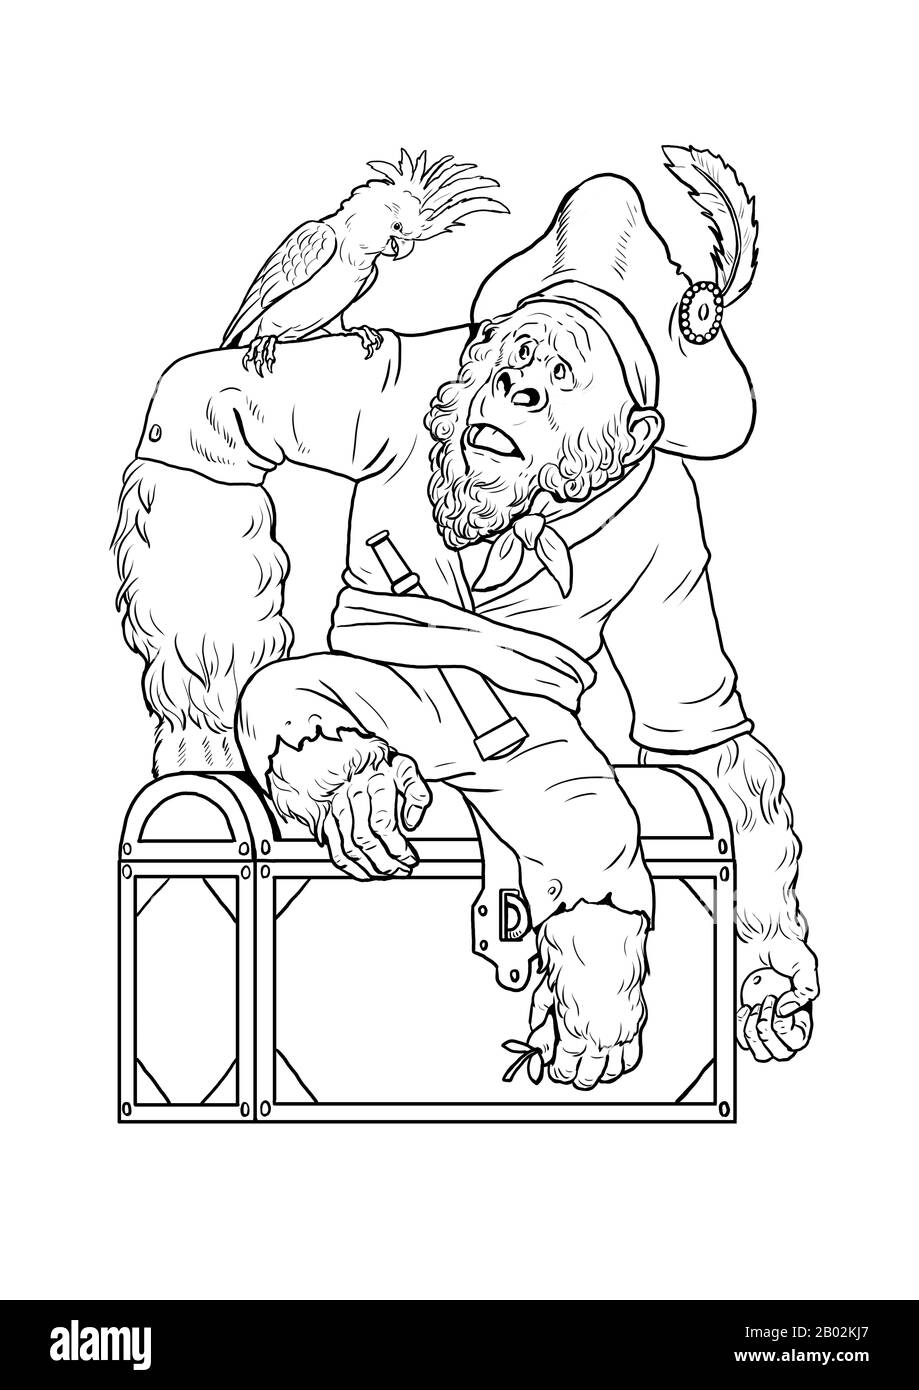 Big gorilla pirate with cockatoo coloring page. Outline clipart illustration. Monkey and apes pirates coloring sheet. Stock Photo